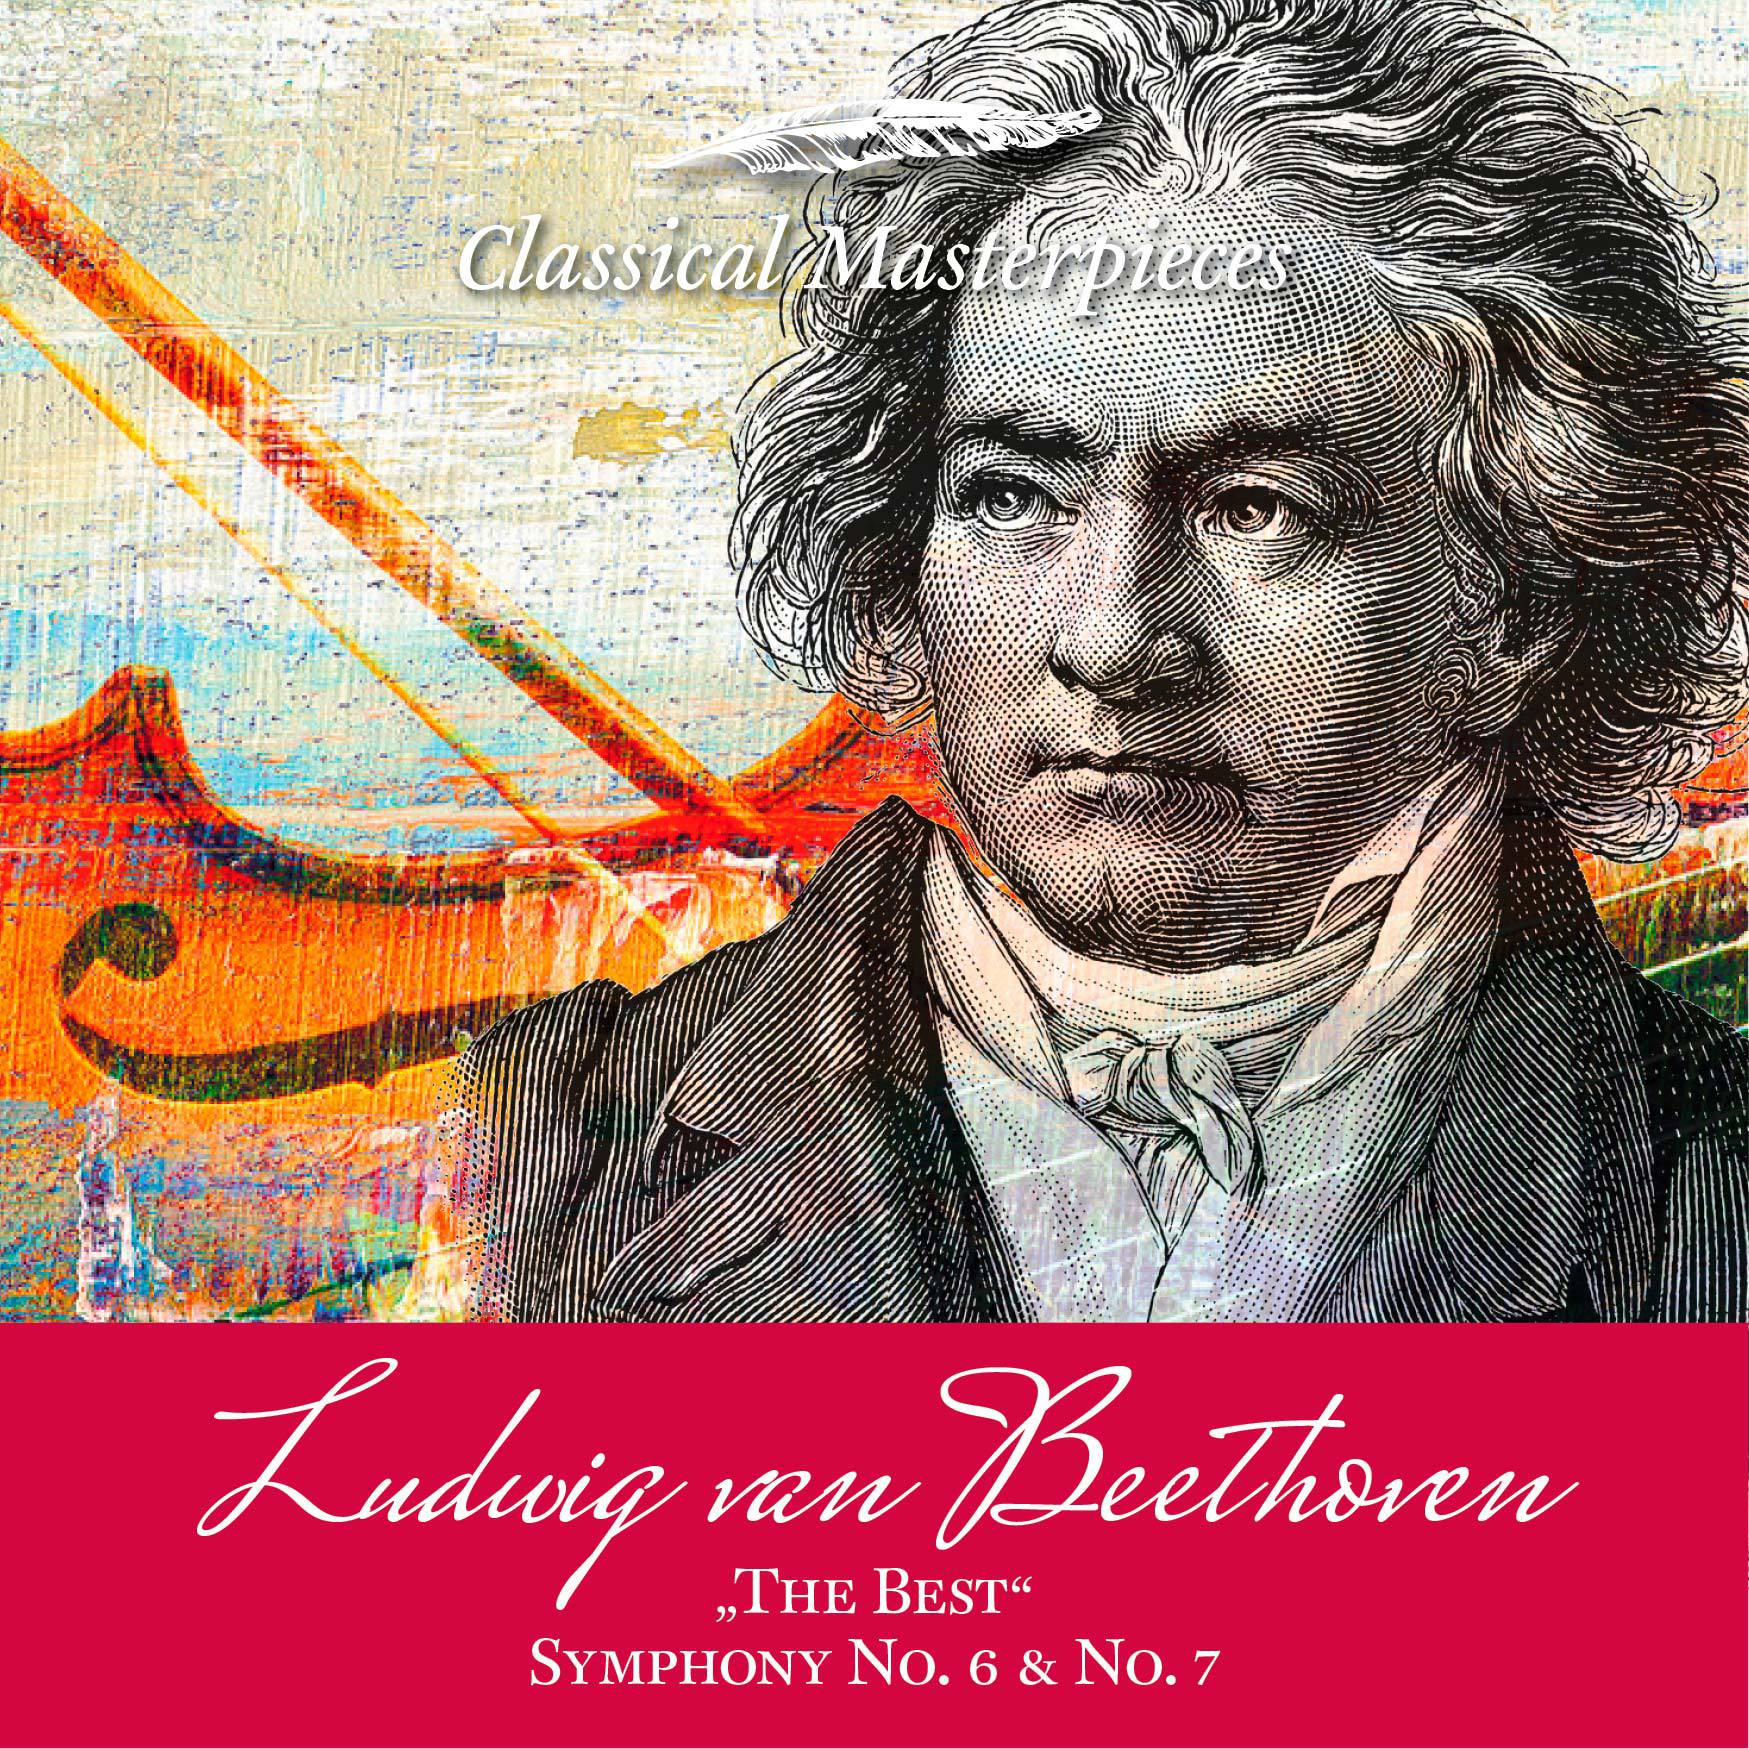 Ludwig van Beethoven "The Best" Symphony No. 6 & 7 (Classical Masterpieces)